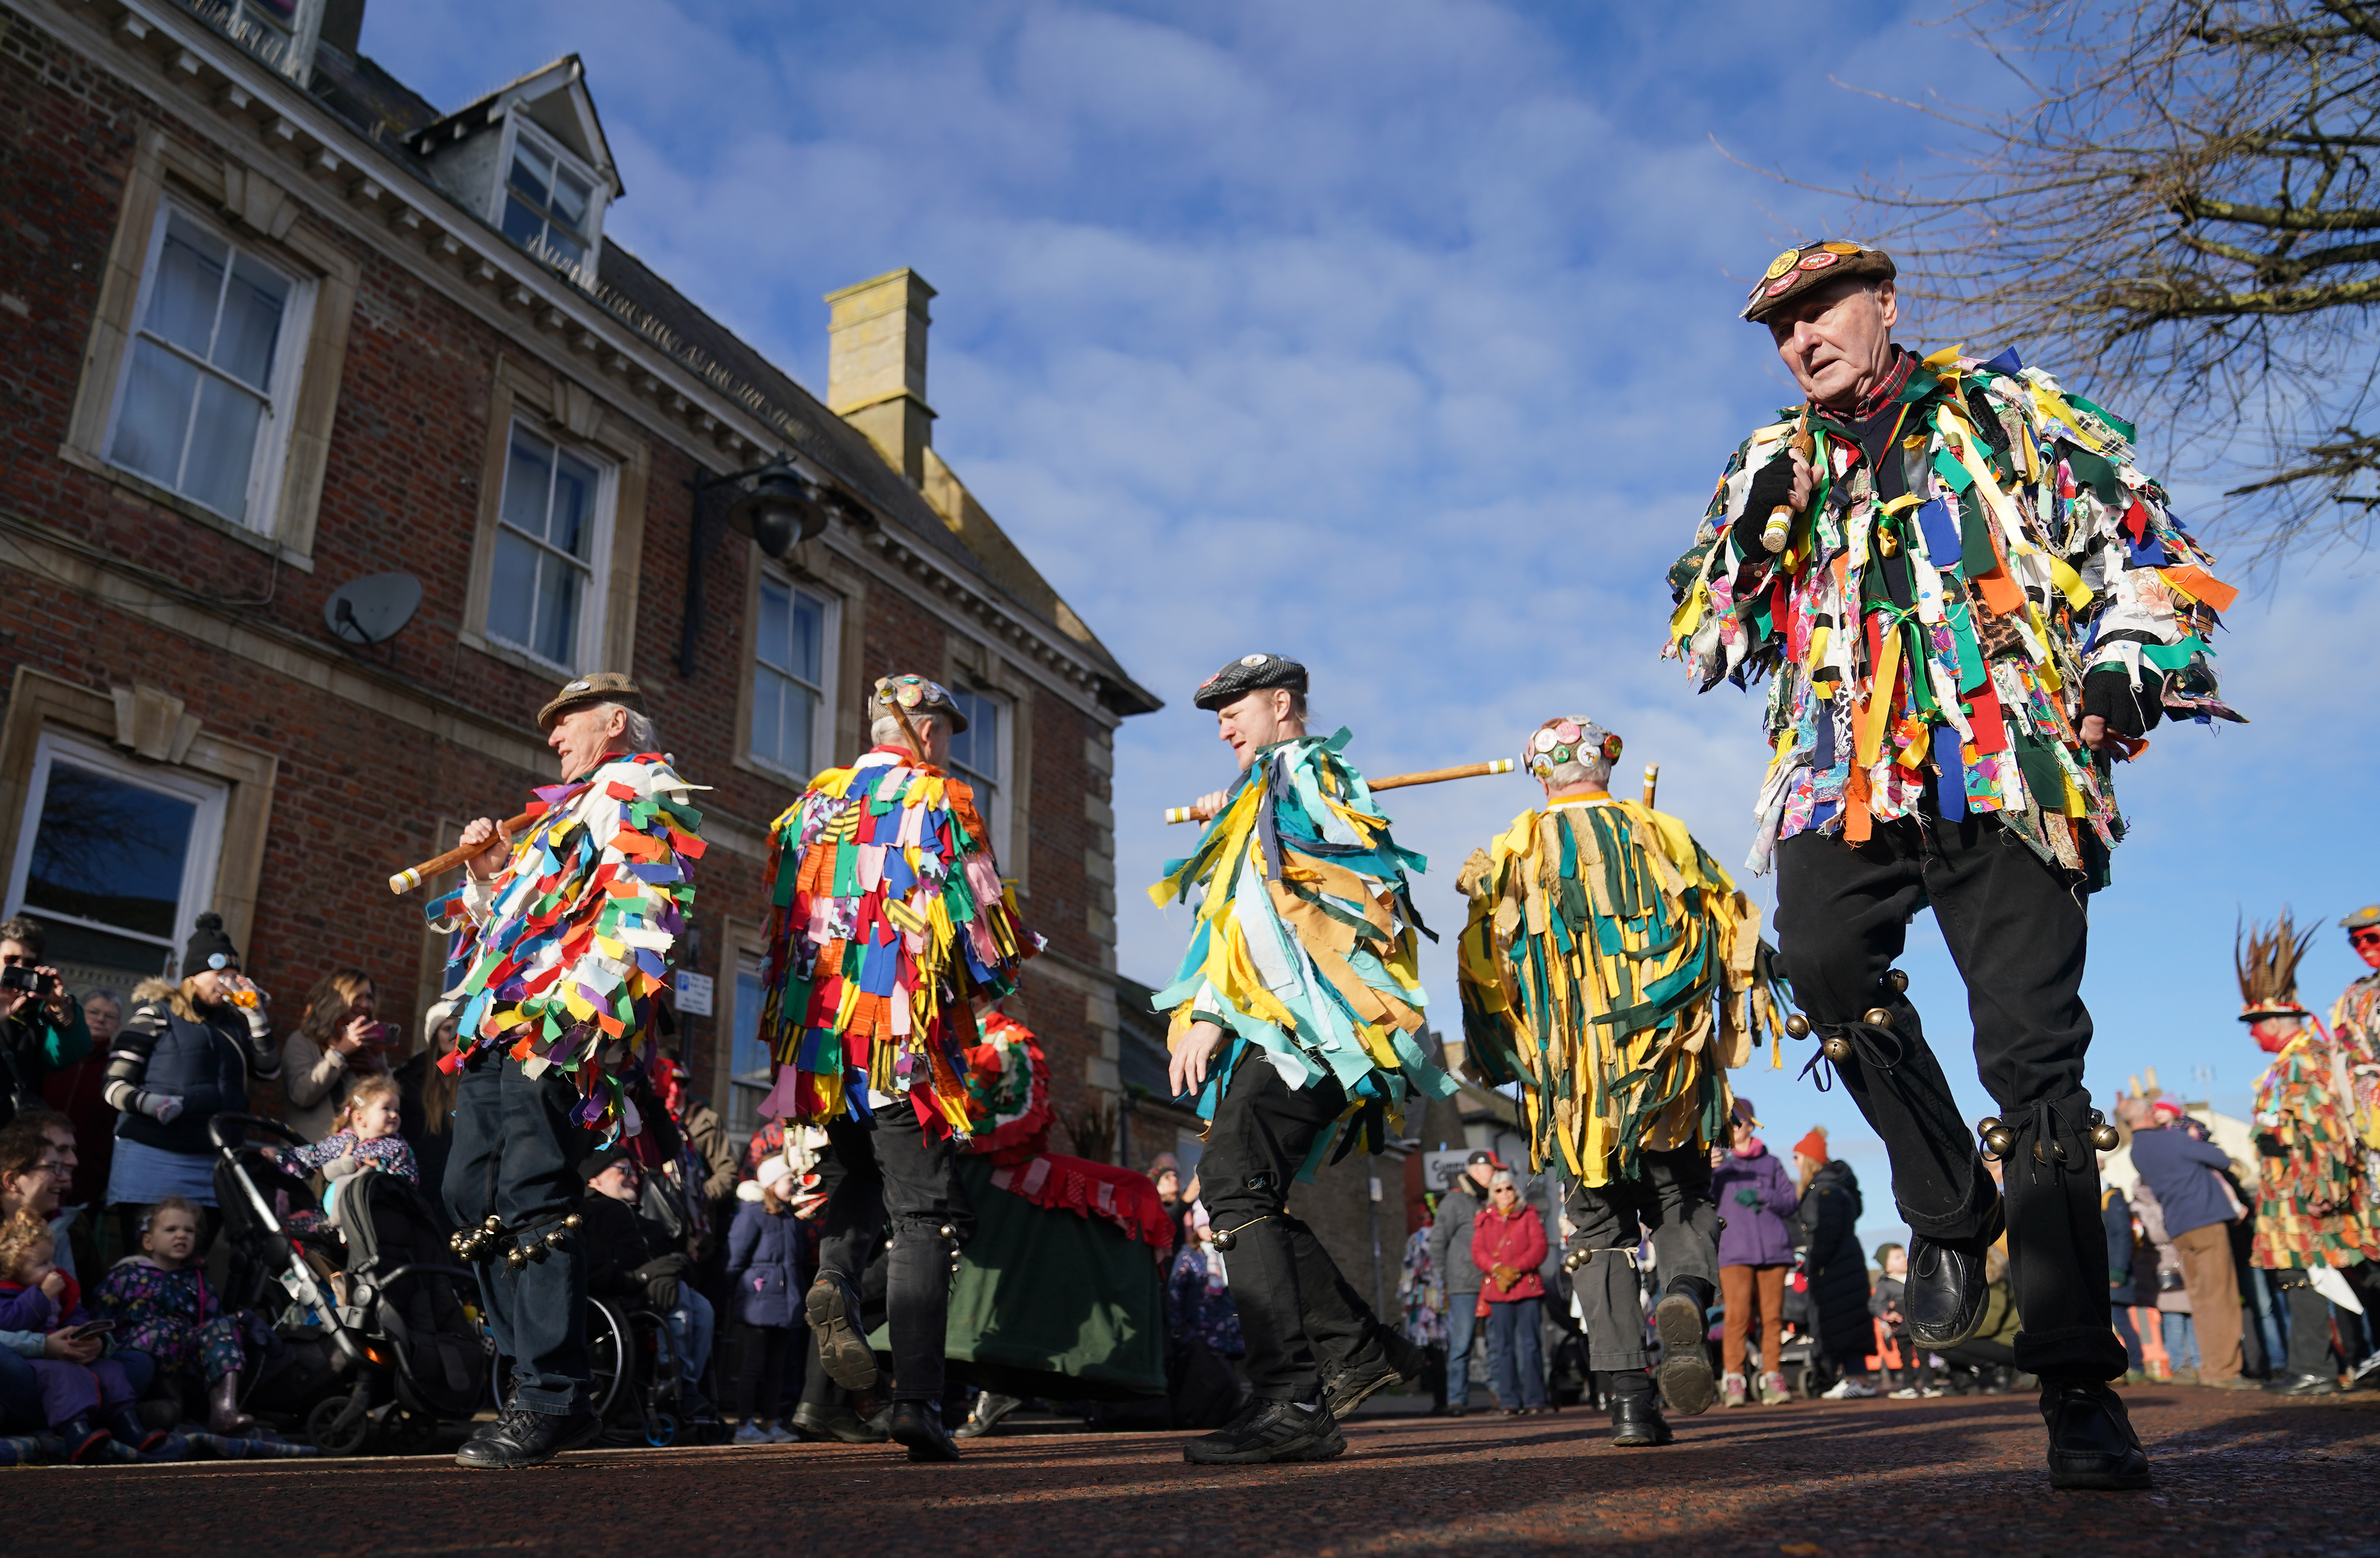 Morris dancers performing in the street wearing colourful attire